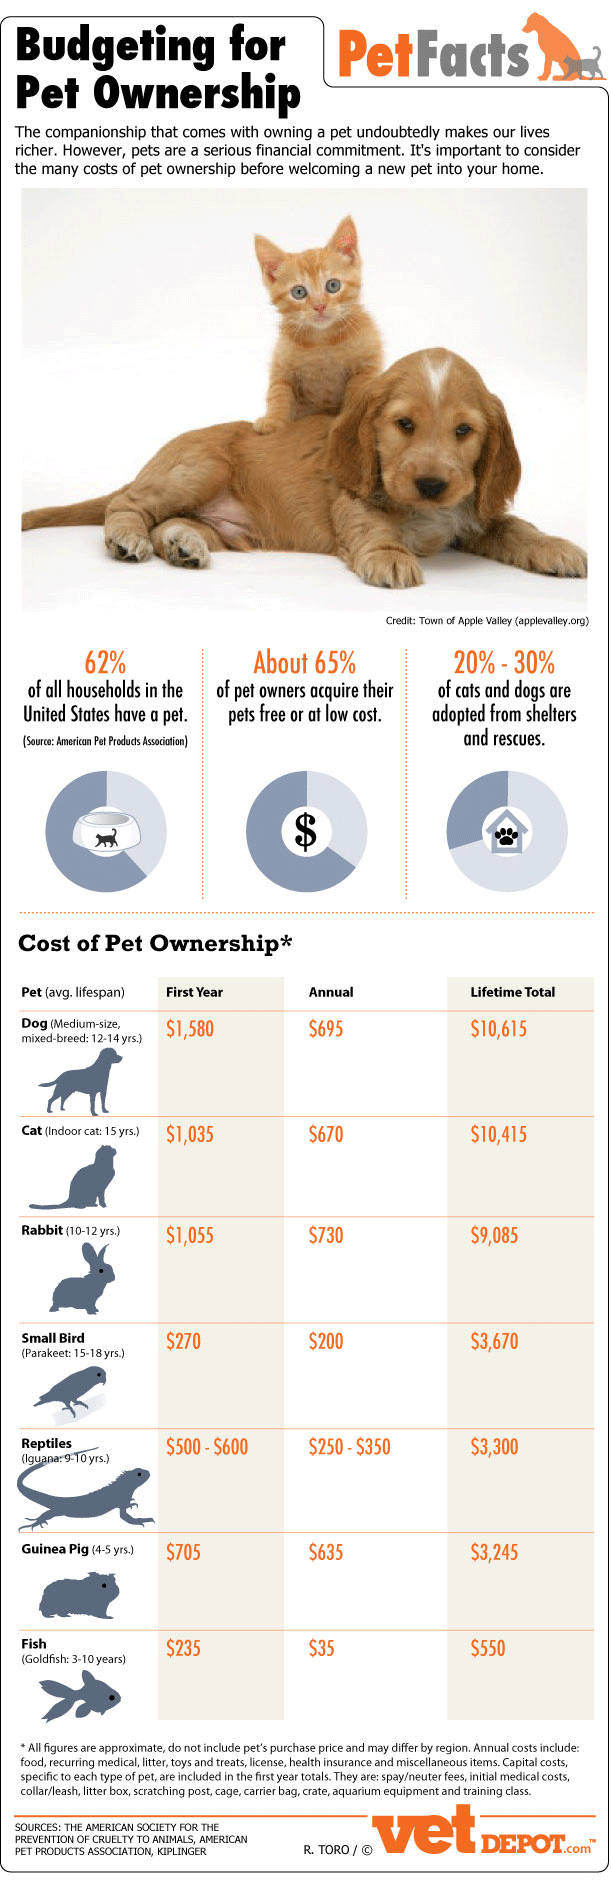 Budgeting for Pet Ownership